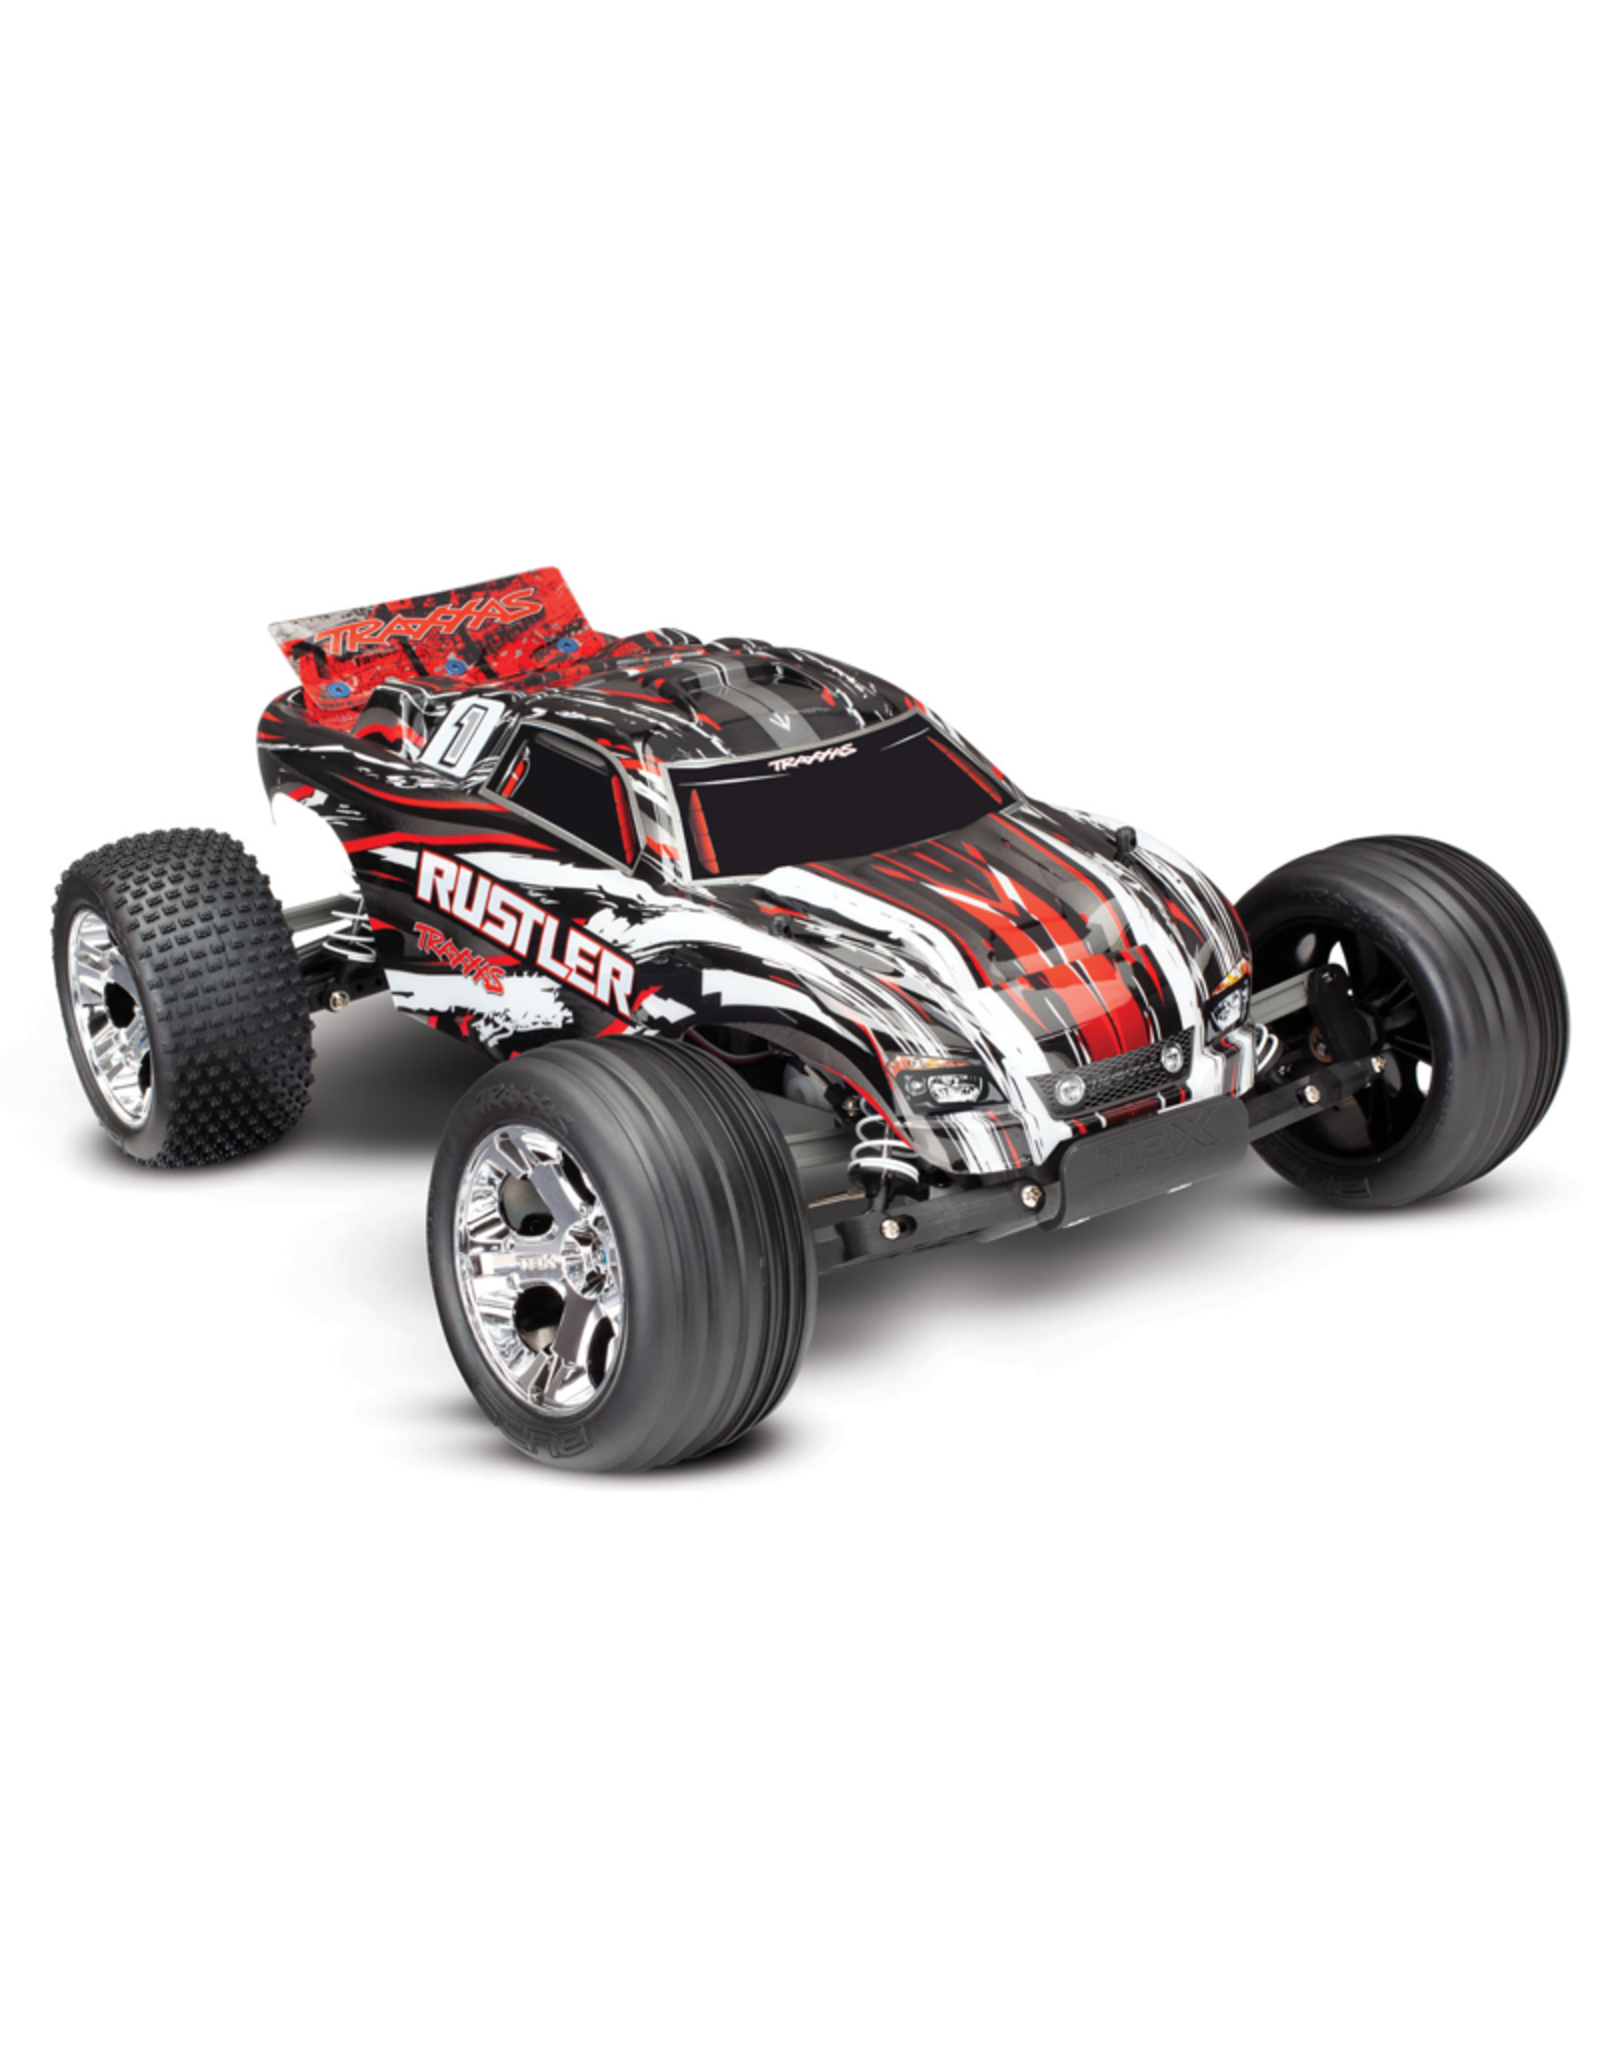 Traxxas TRA37054-4 RED Rustler: 1/10 Scale Stadium Truck with TQ 2.4 GHz radio system (DOES NOT COME WITH BATTERY & DC CHARGER)